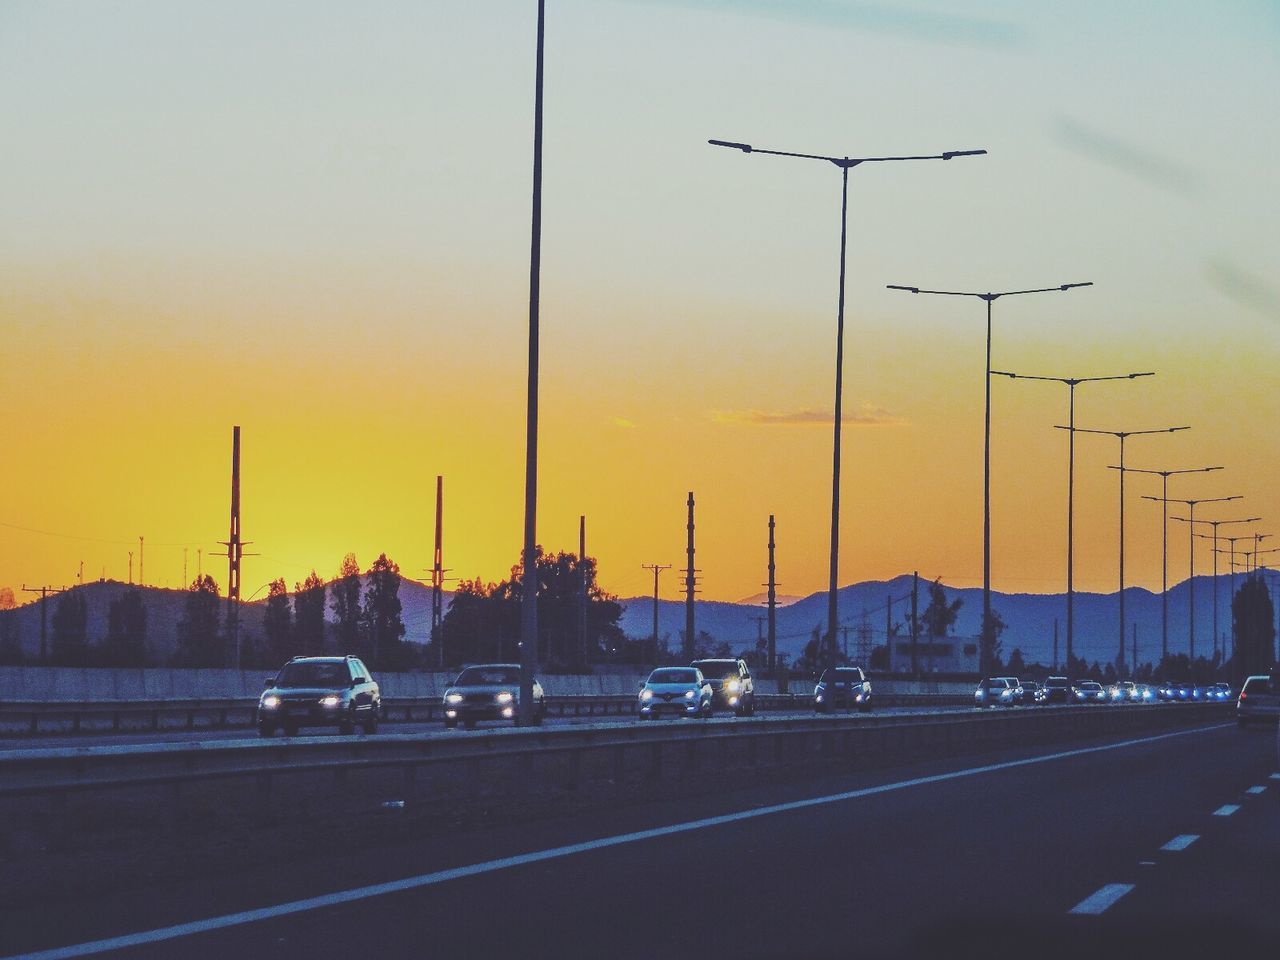 VEHICLES ON ROAD AGAINST SKY DURING SUNSET